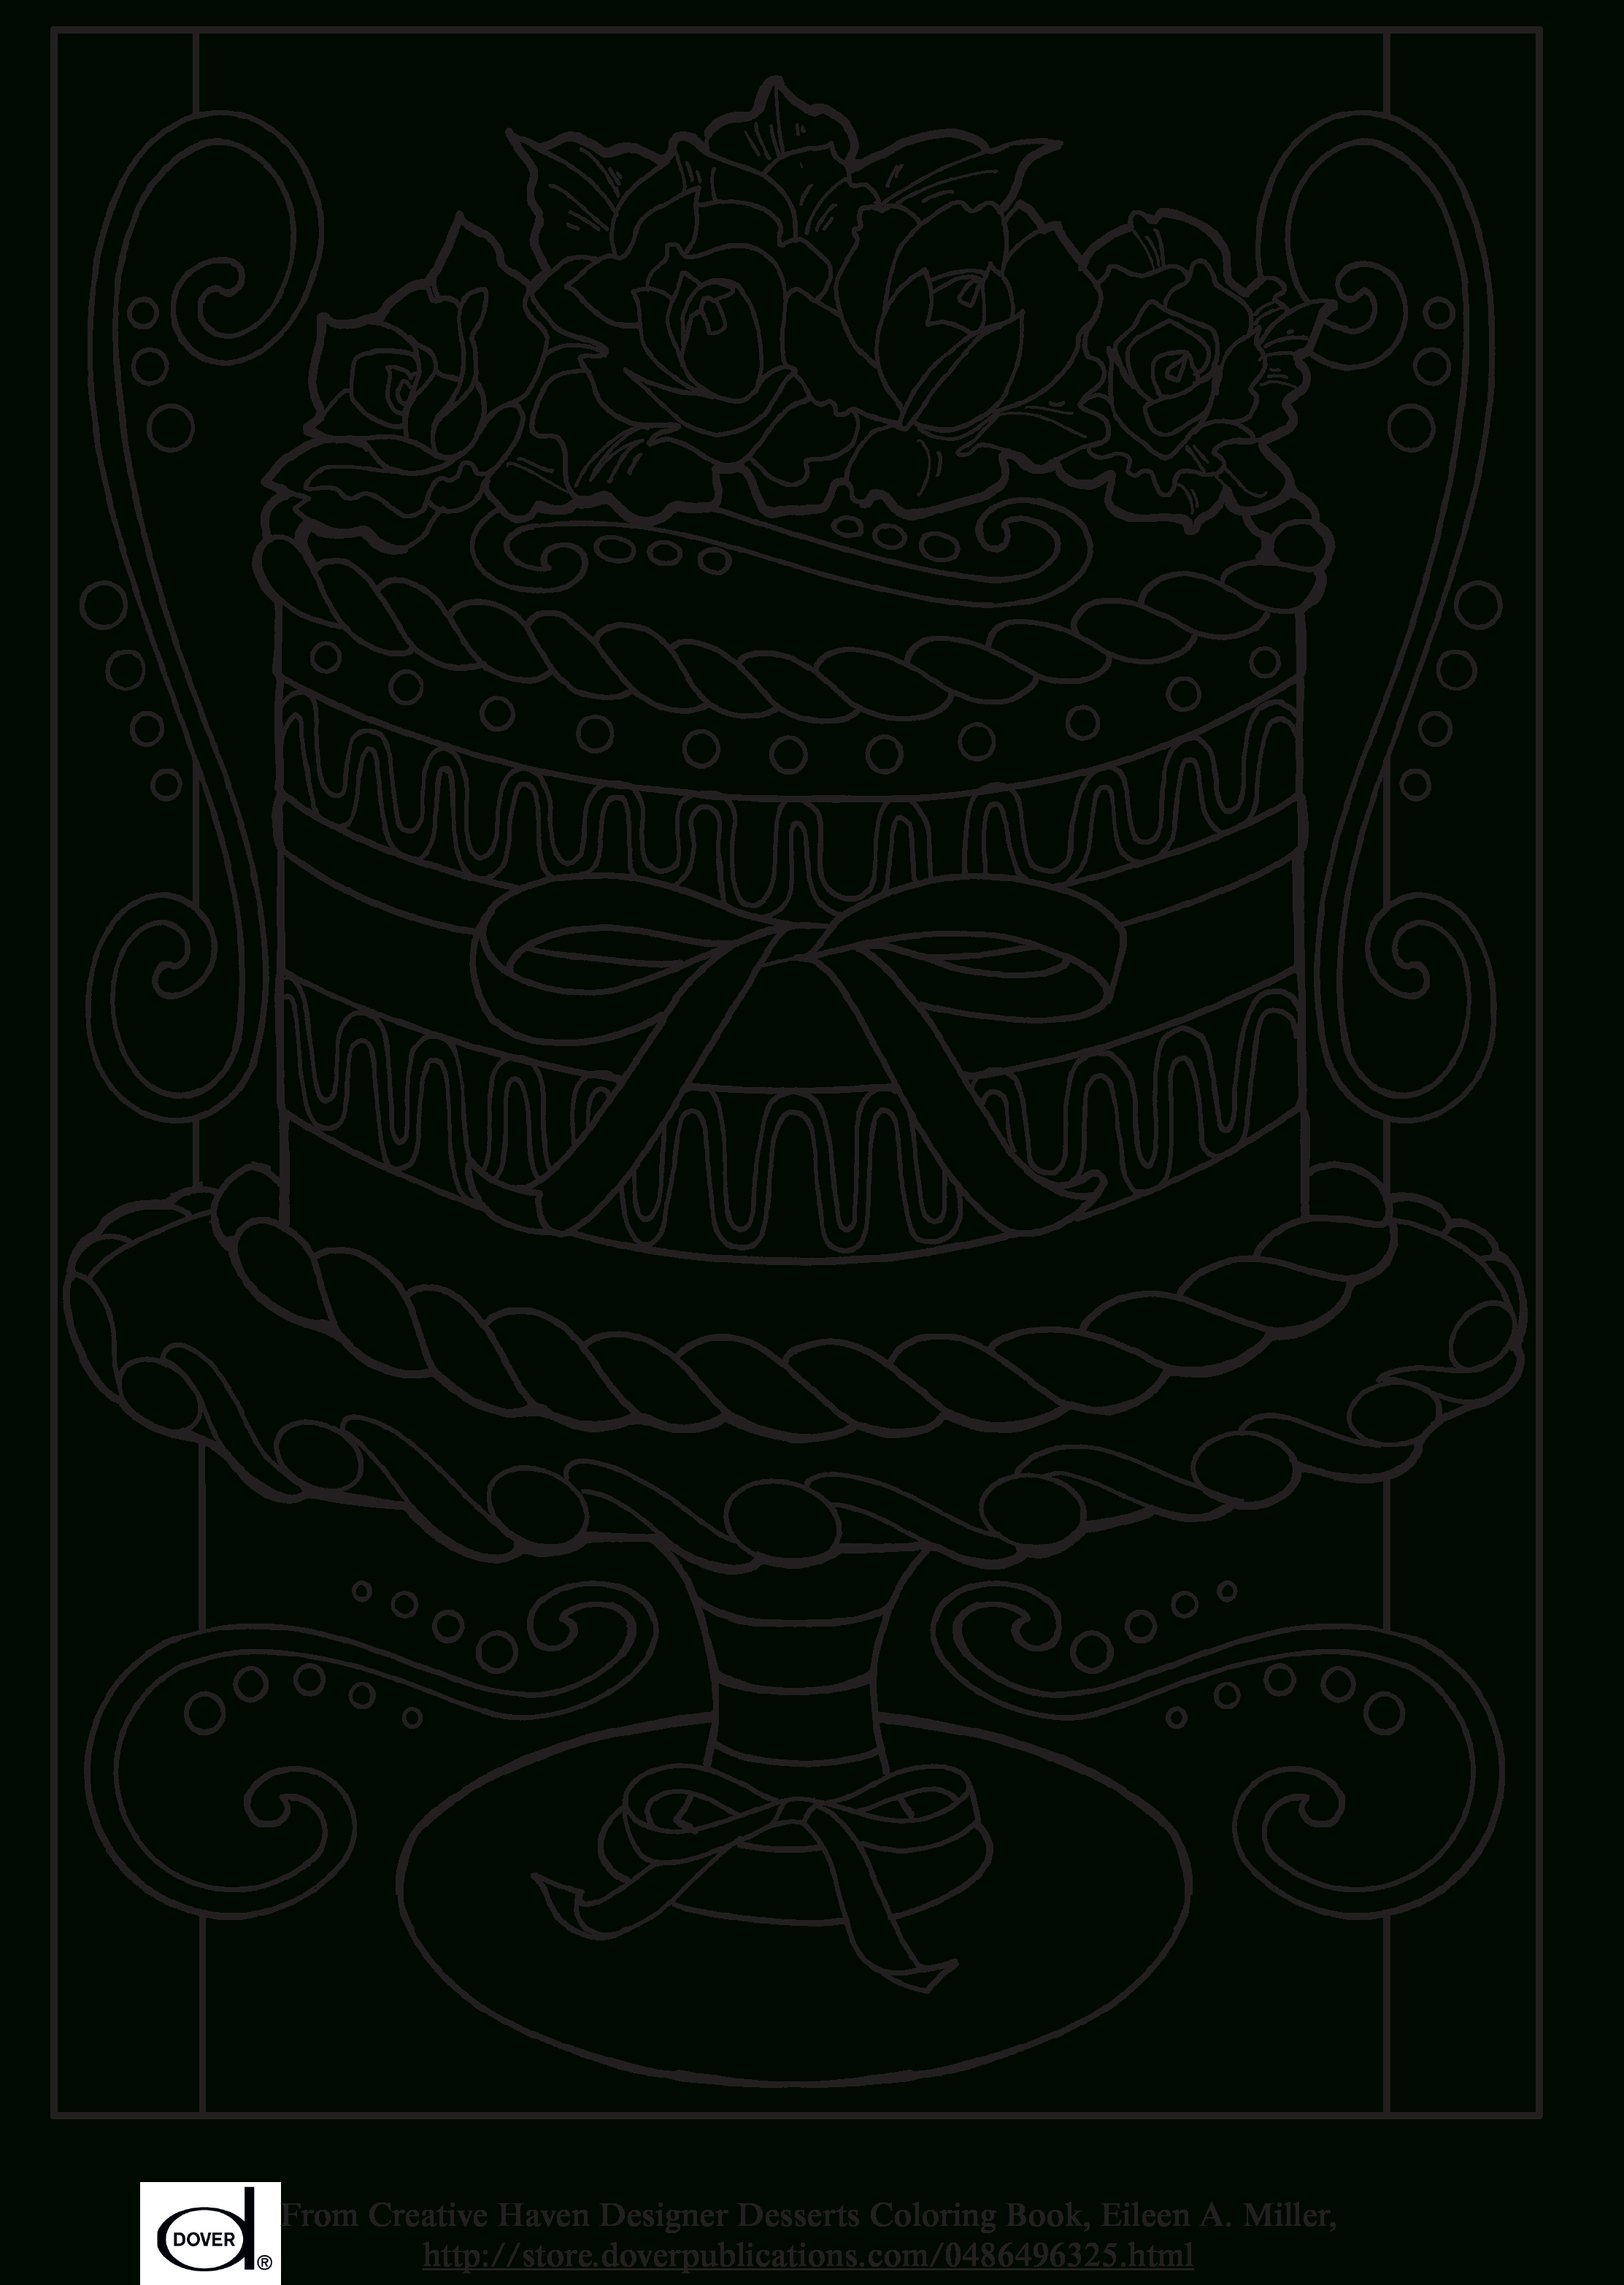 Free Printable Adult Coloring Pages - Wedding Cake | Art: Coloring - Free Printable Coloring Cards For Adults